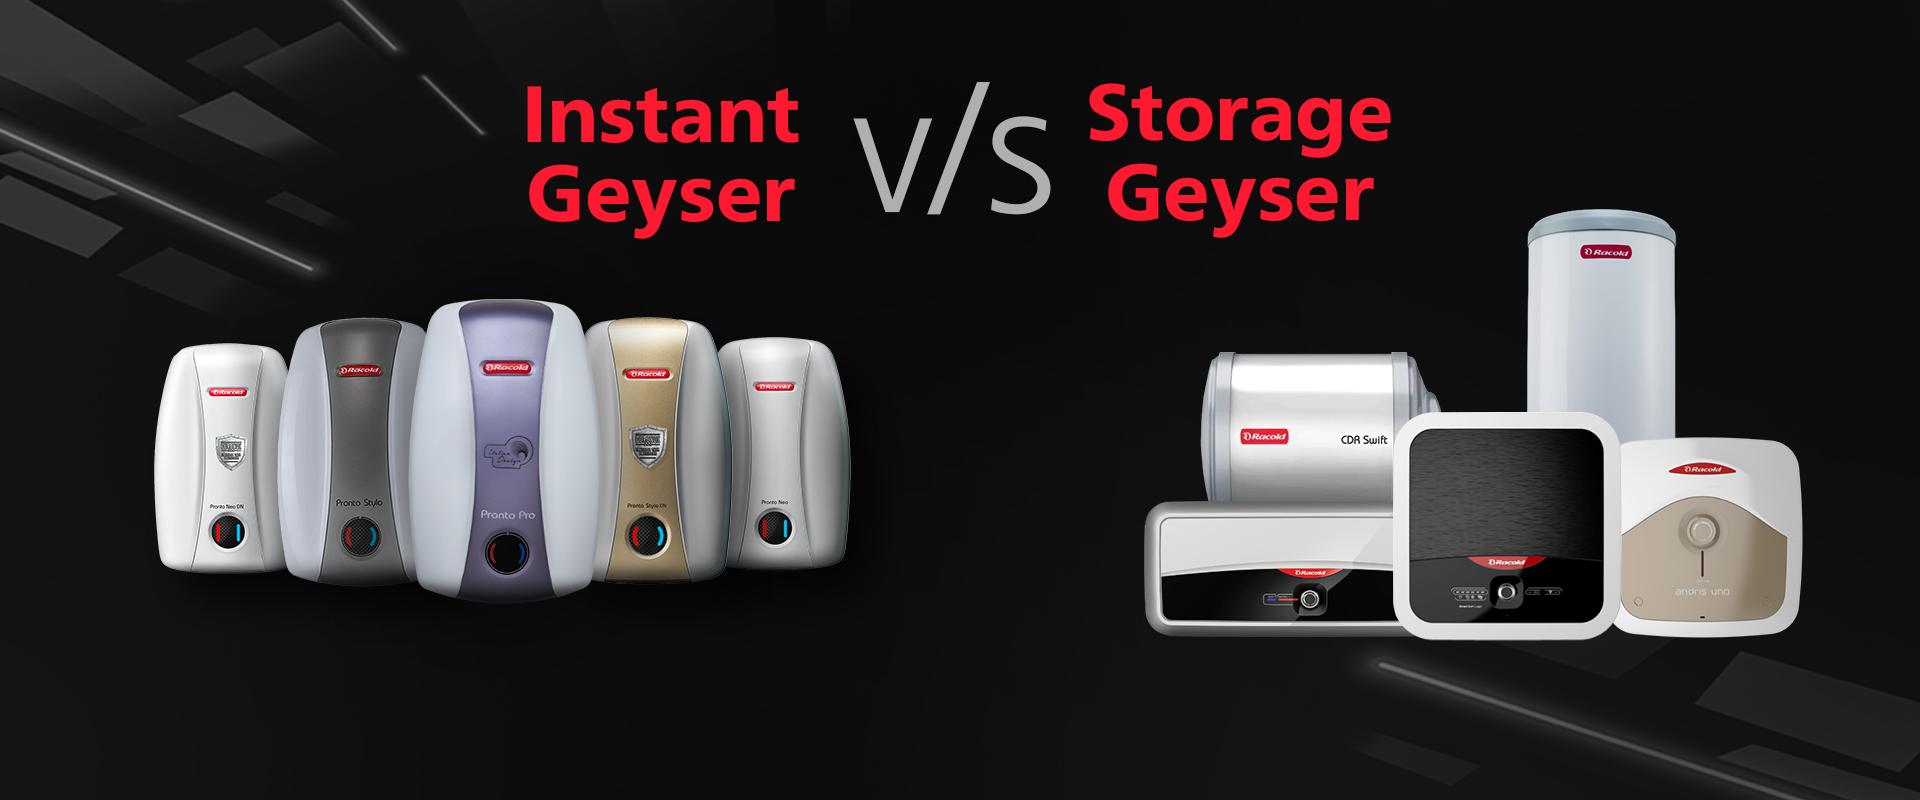 Instant Geyser v/s Storage Geyser- What is the Difference?